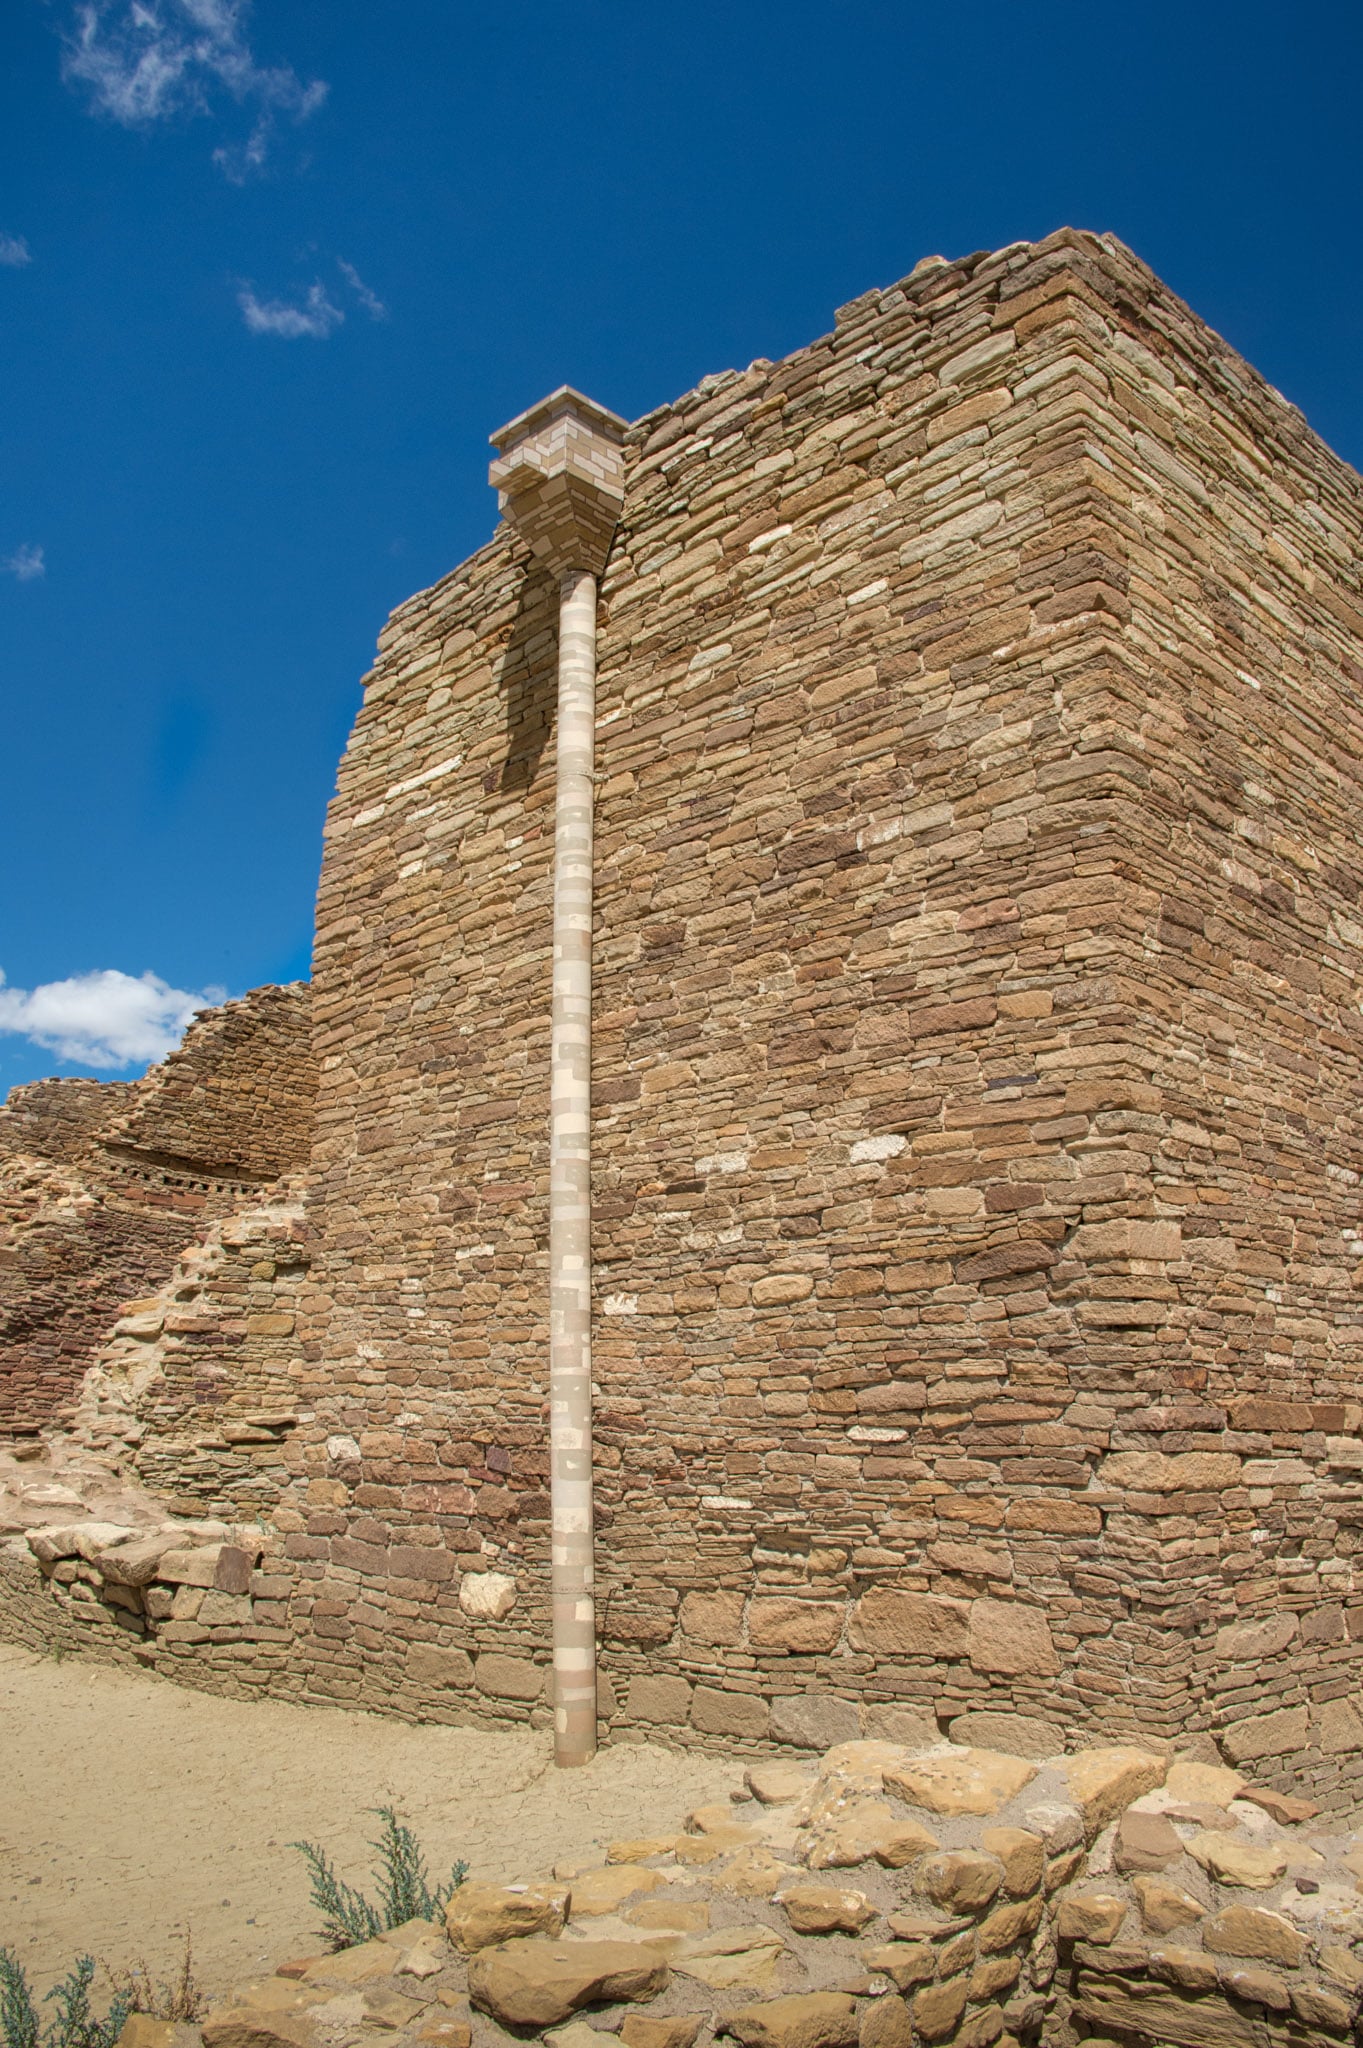 A downspout used to direct runoff from the top of a wall is painted with a camoflage pattern to help it blend in better at the Pueblo del Arroyo ruins in Chaco Canyon, New Mexico.